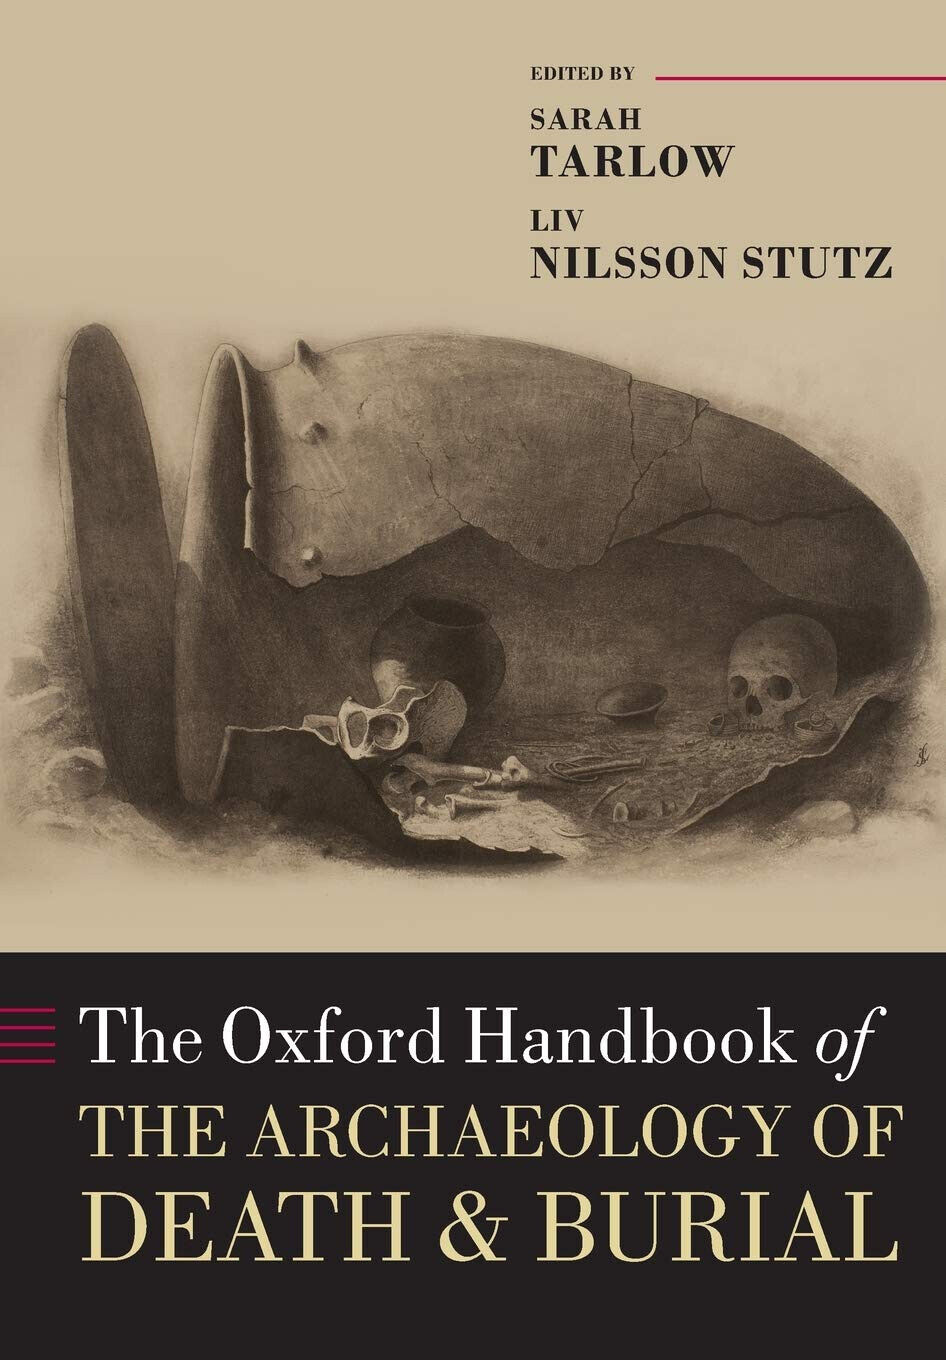 The Oxford Handbook Of The Archaeology Of Death And Burial - Sarah Tarlow - 2019